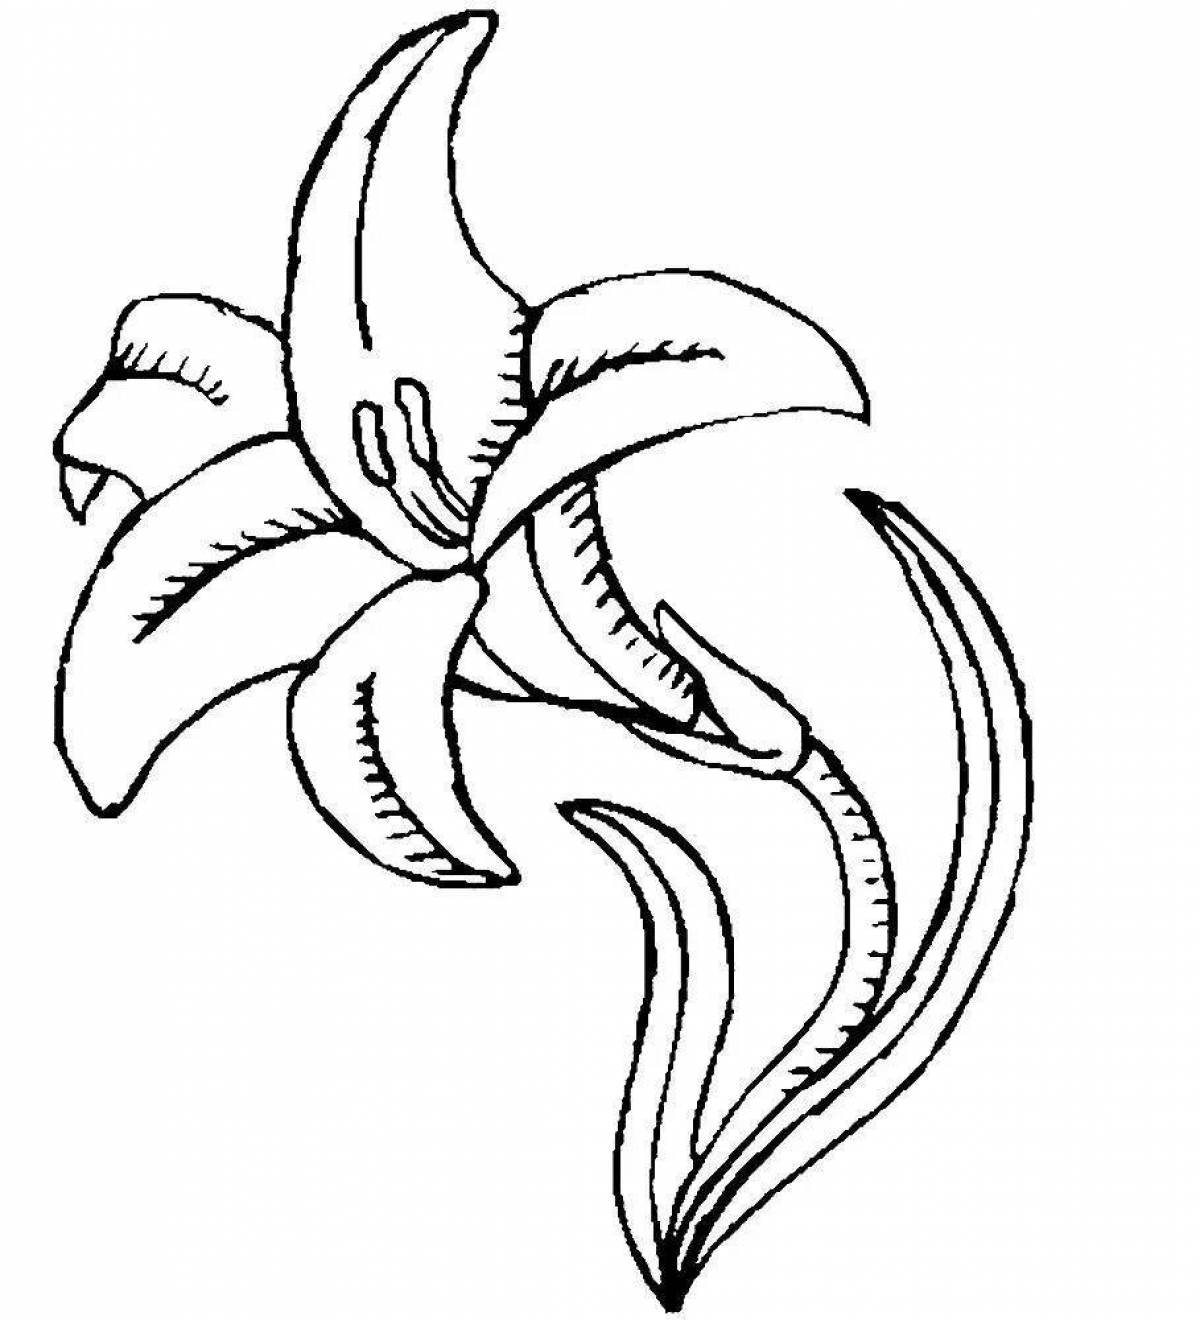 Coloring book sparkling lily for children